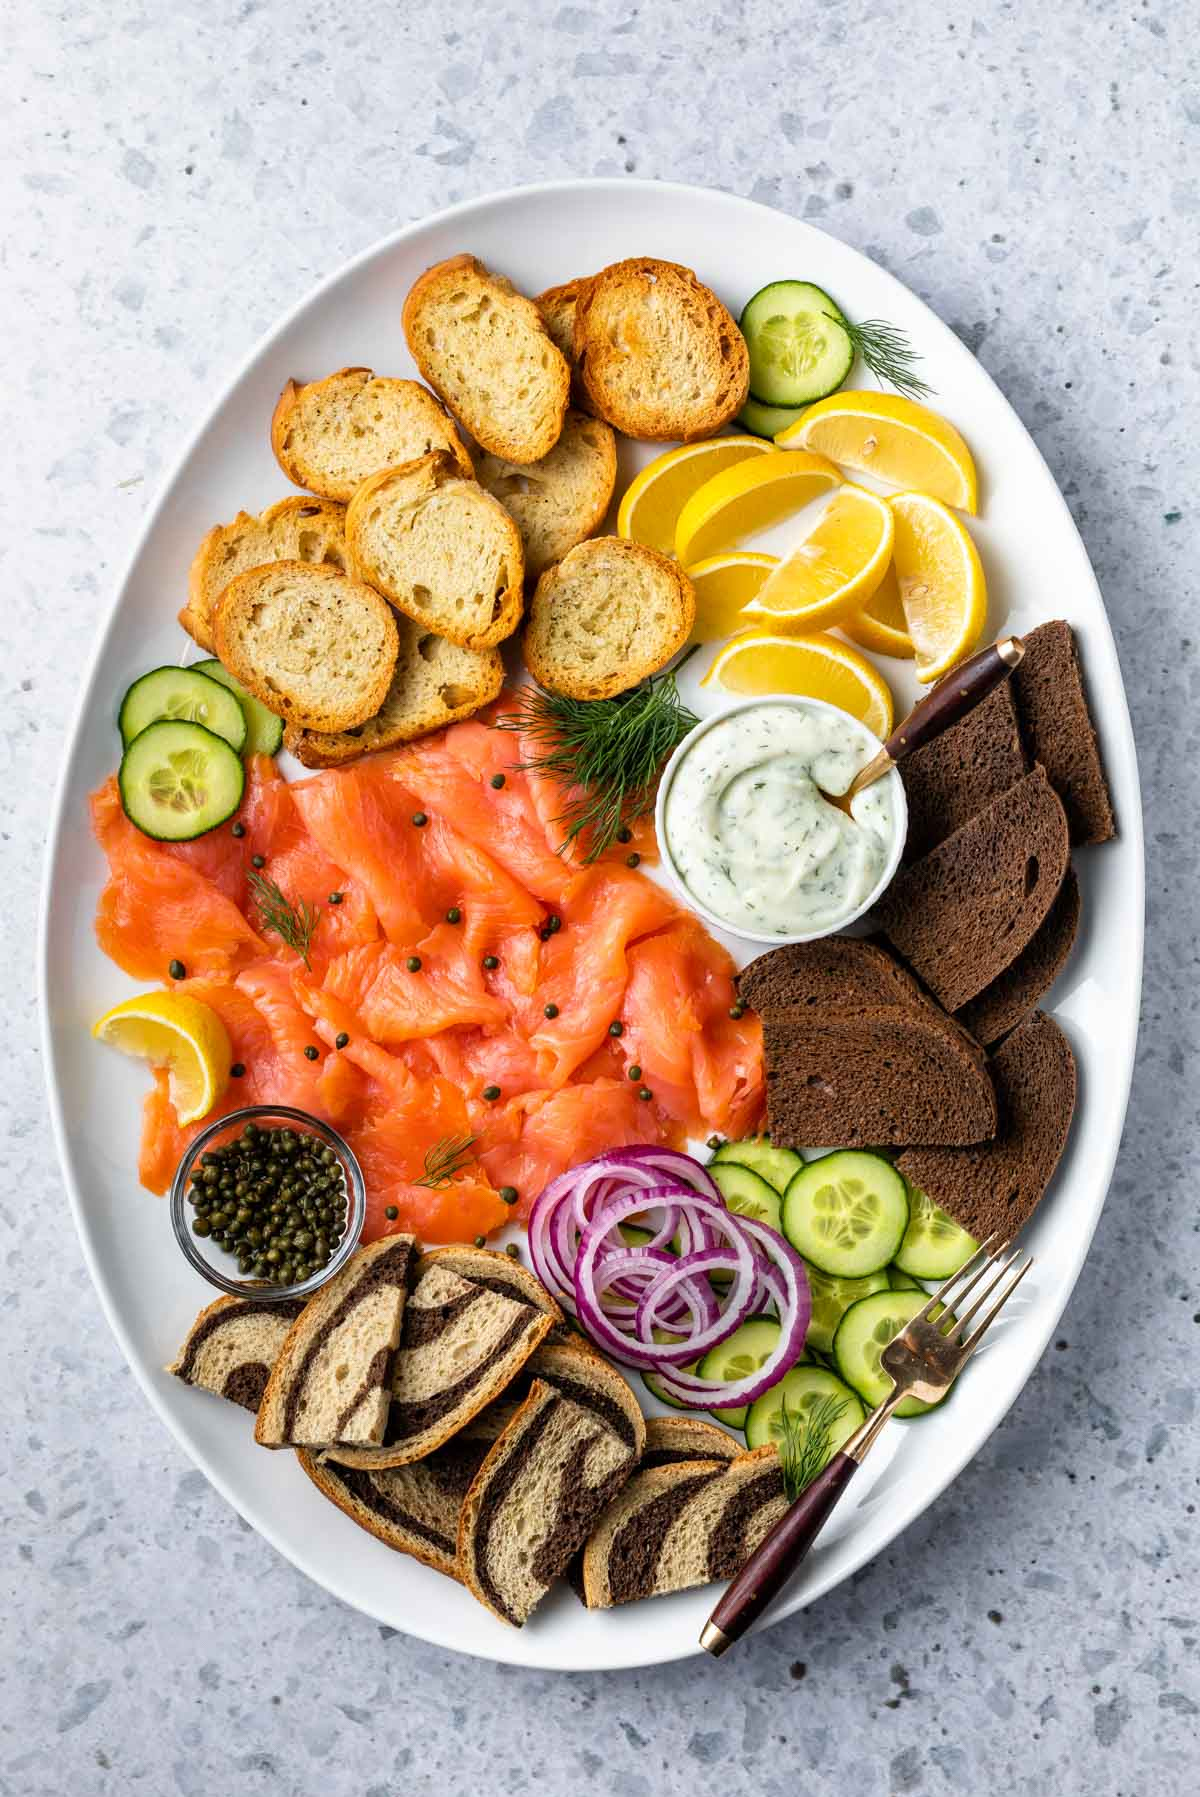 Simply Whisked  displays creamy cheese, smoked salmon, lemon, and bread on their salmon charcuterie board.